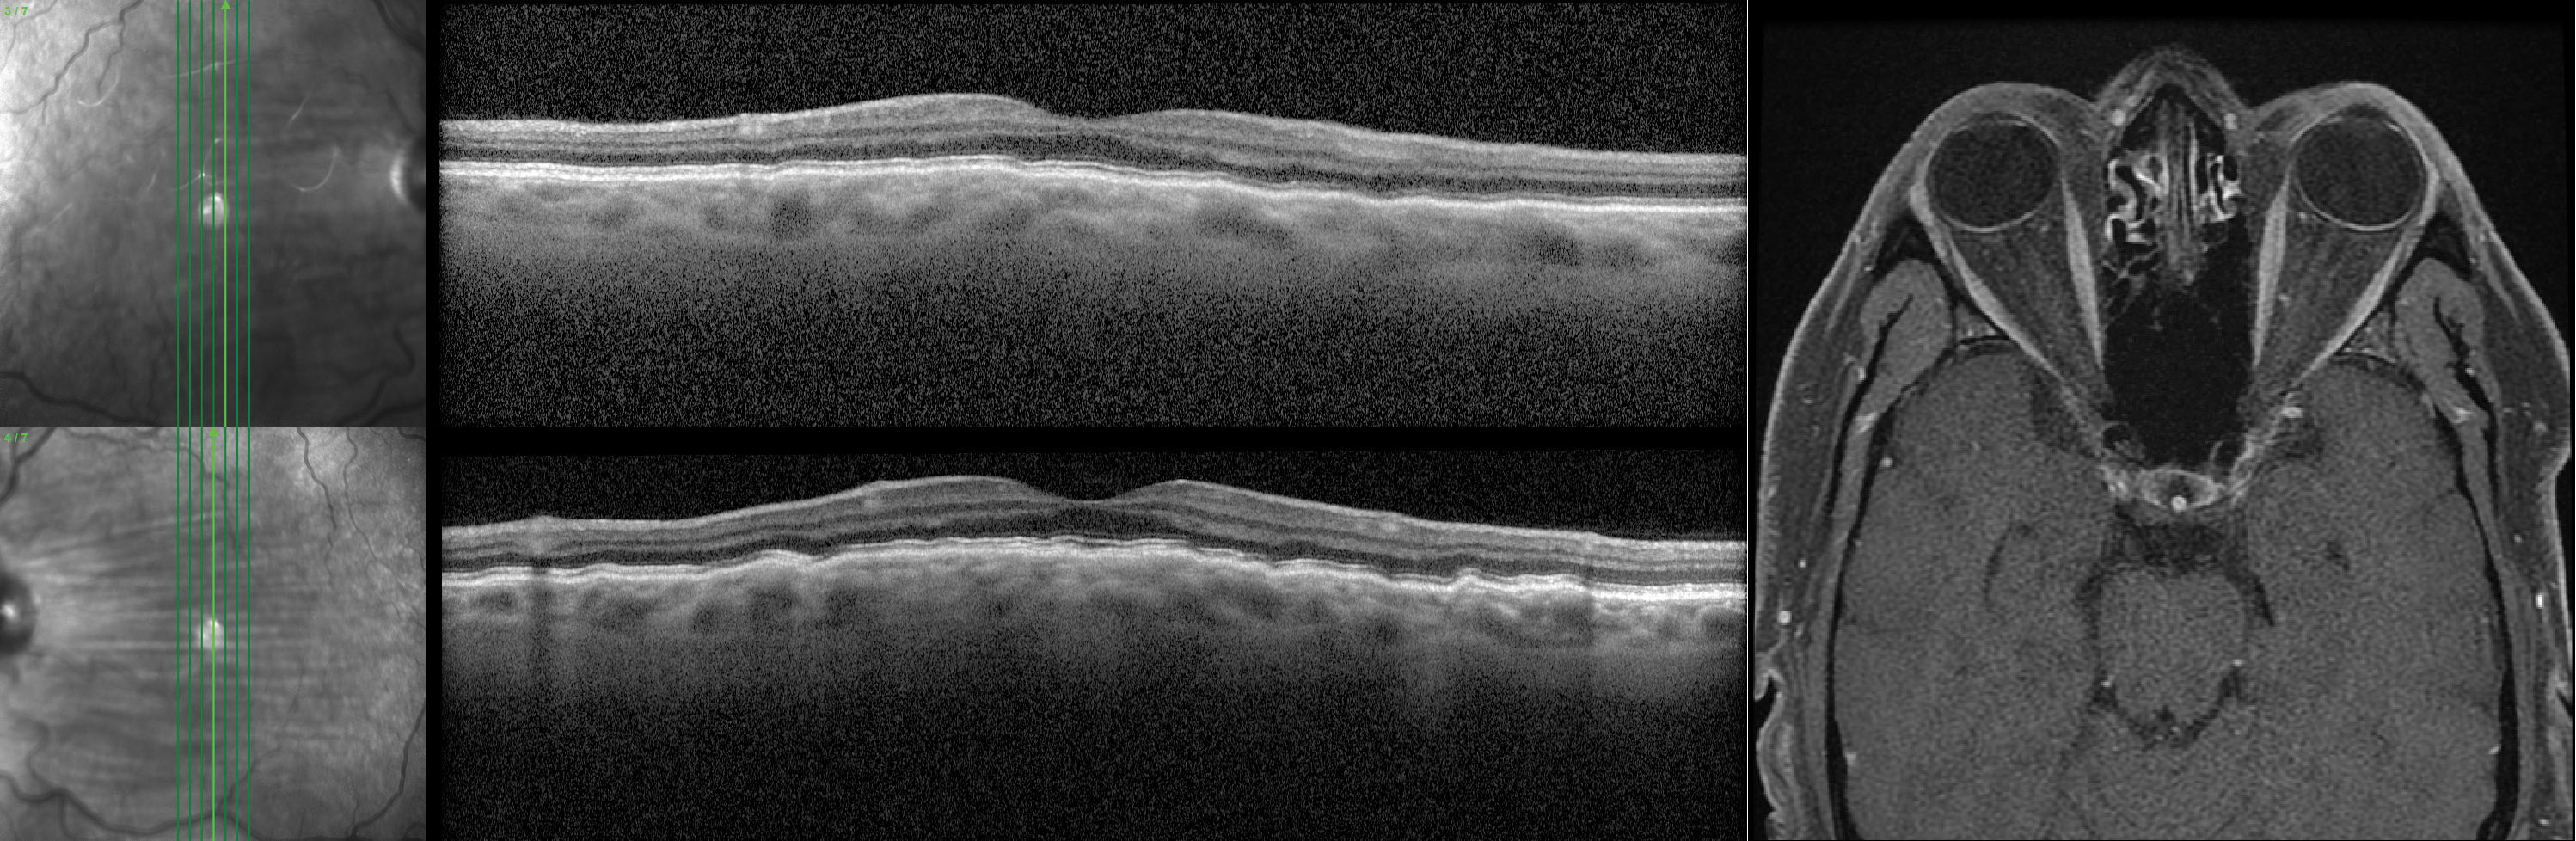 These bilateral choroidal folds OS>OD were found in a male patient in his 40s. He was asymptomatic, moderately hyperopic and had no notable ocular history. His MRI (axial T1) showed posterior globe flattening OD>OS.